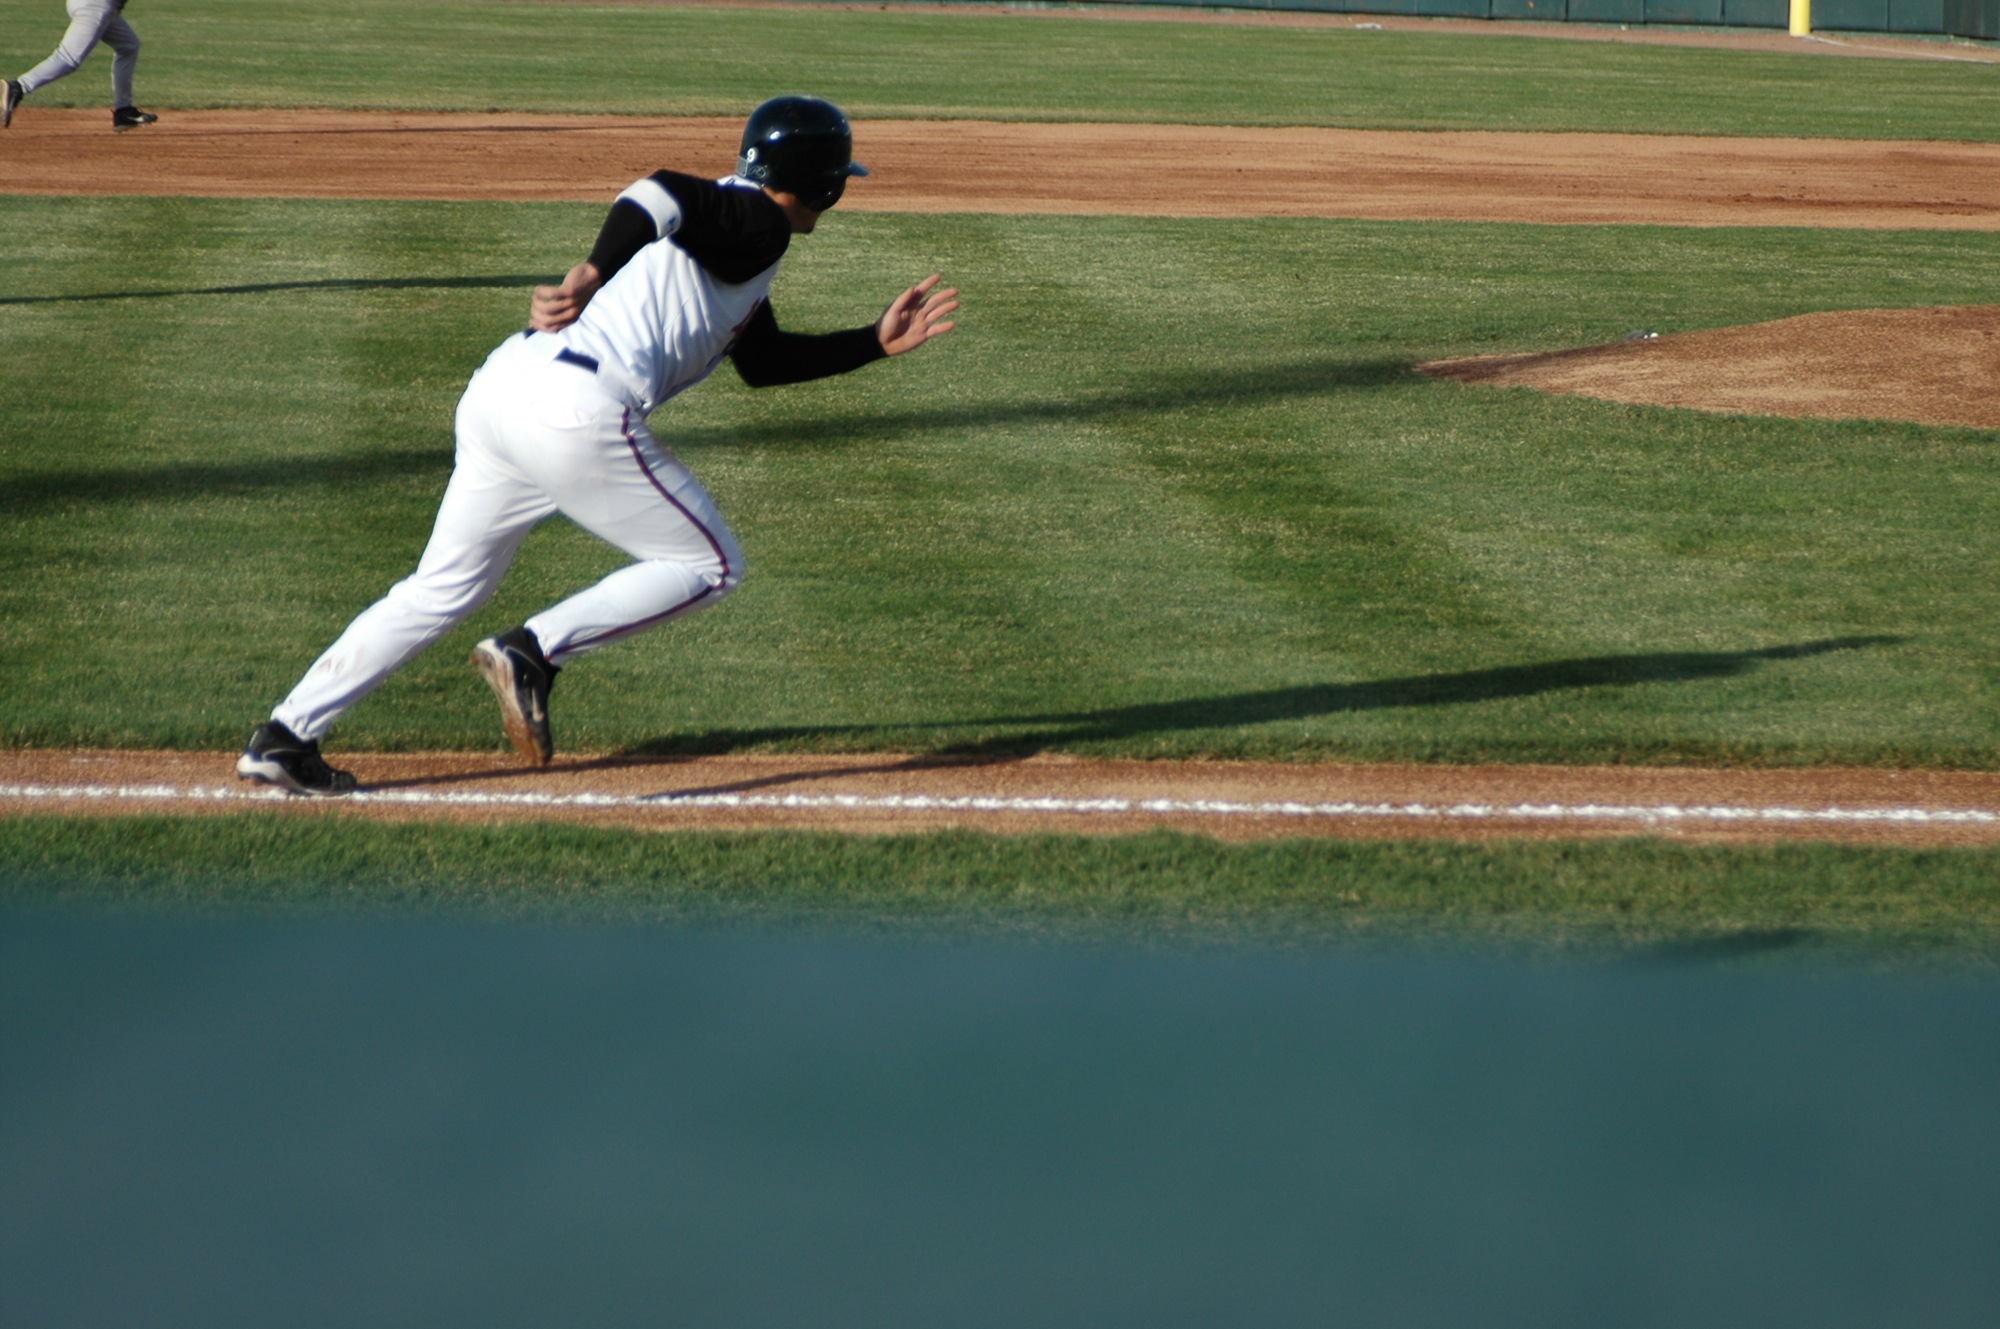 baseball player attempting to run during a game